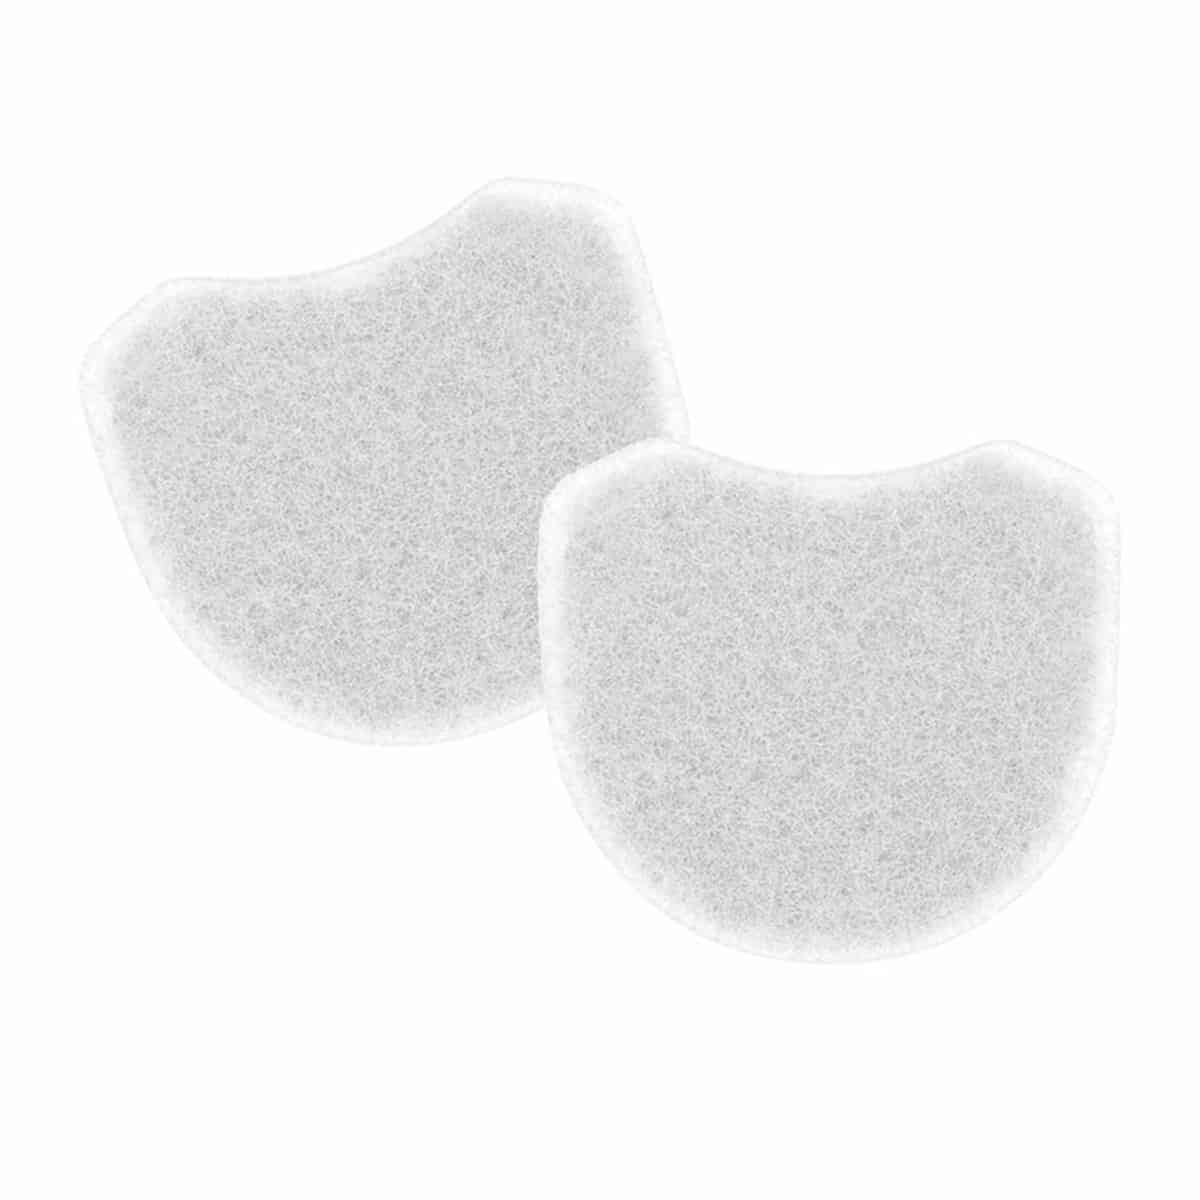 ResMed AirMini Hypoallergenic Filter (2 pack)